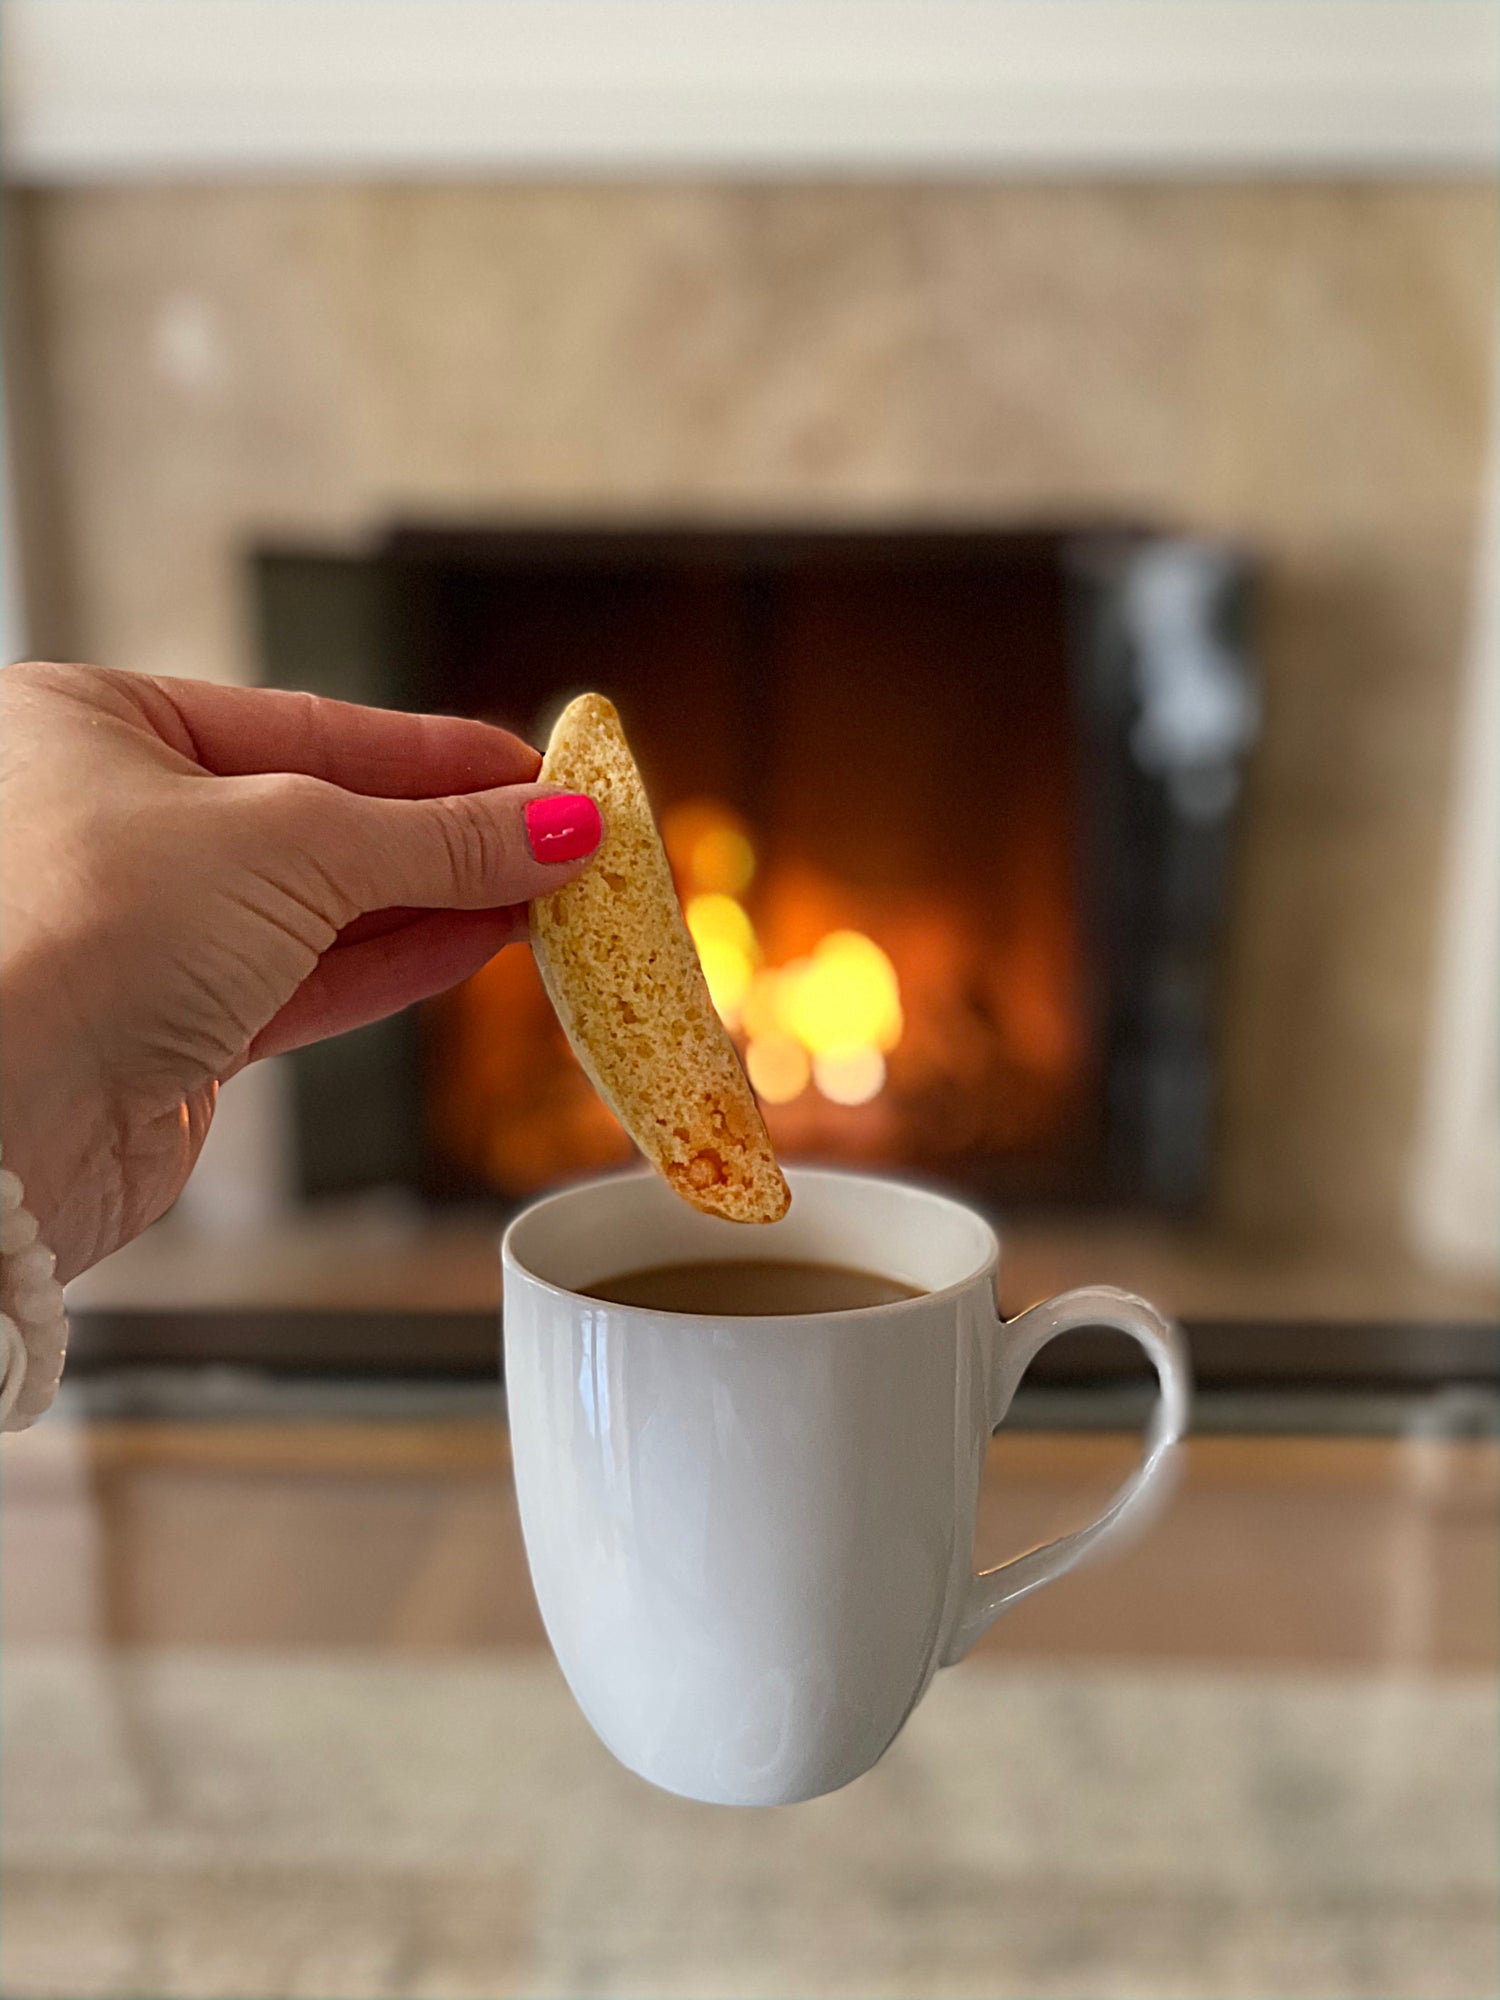 Sorelle Biscotti LLC coffee and biscotti cookie by fireplace